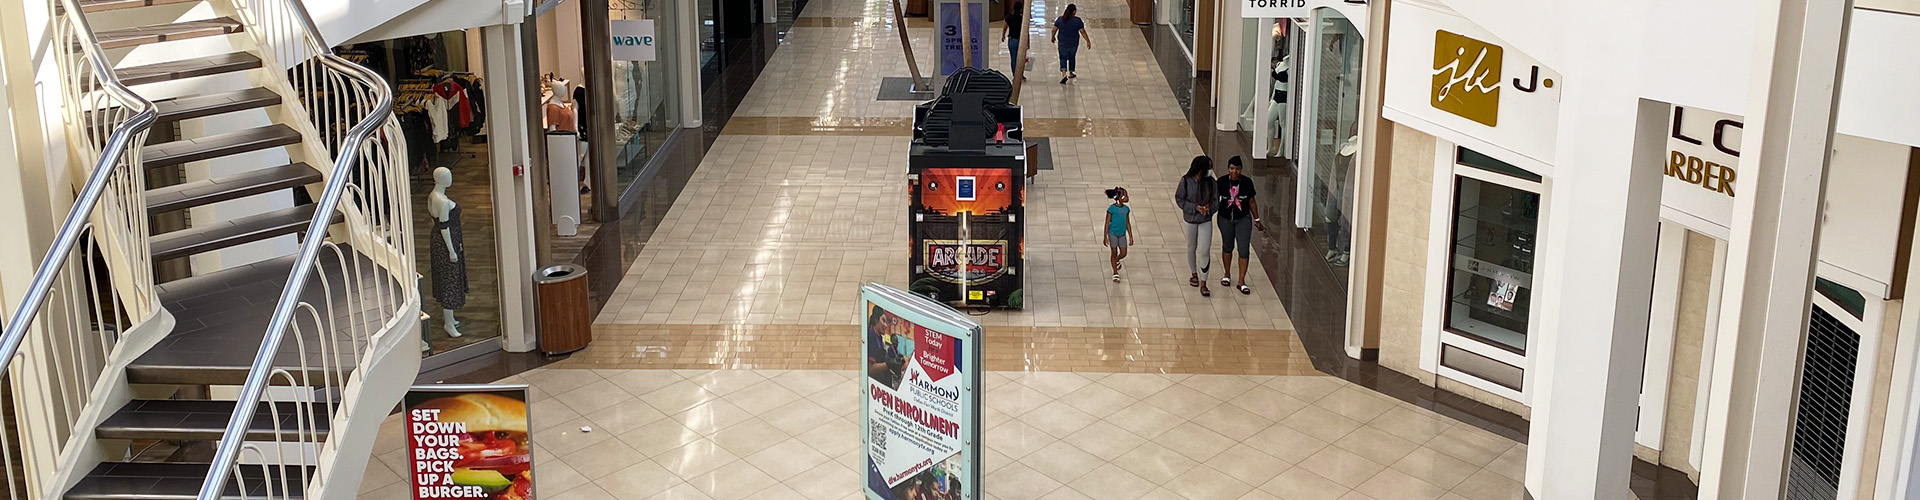 Reopened Retail Part 2: Malls in Fort Worth & Dallas Report Banner featuring inside of Hulen Mall in Texas